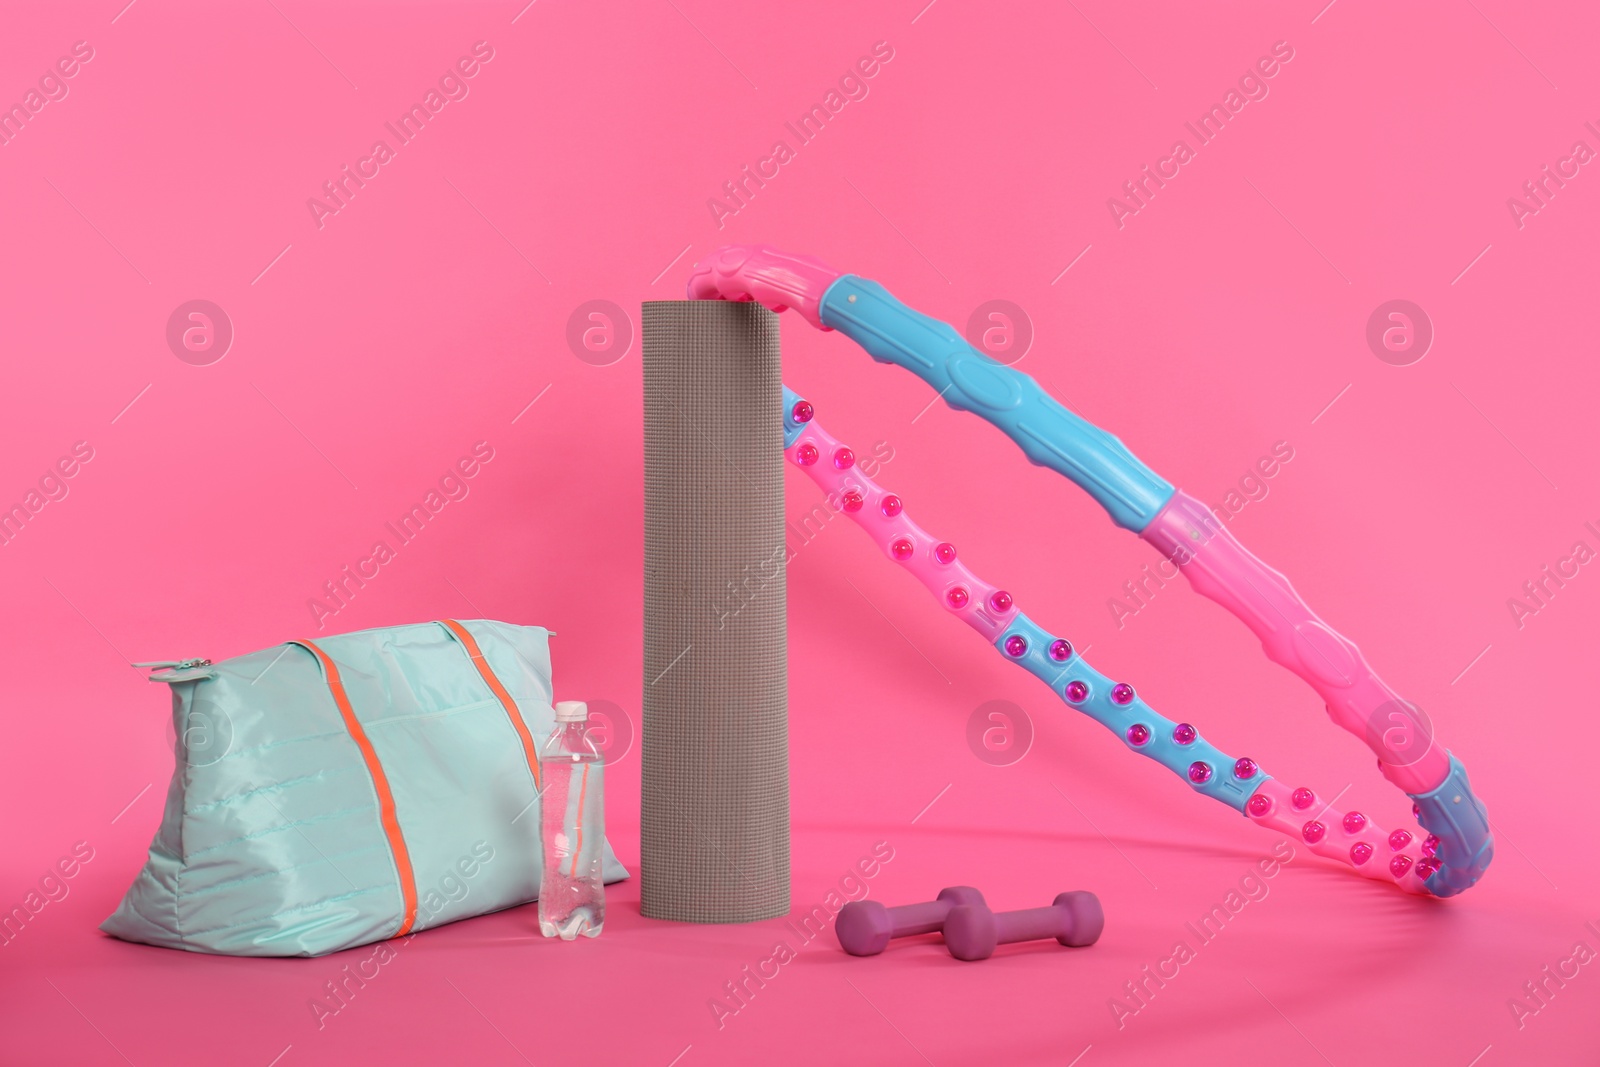 Photo of Hula hoop, gym bag, bottle of water, dumbbells and yoga mat on pink background